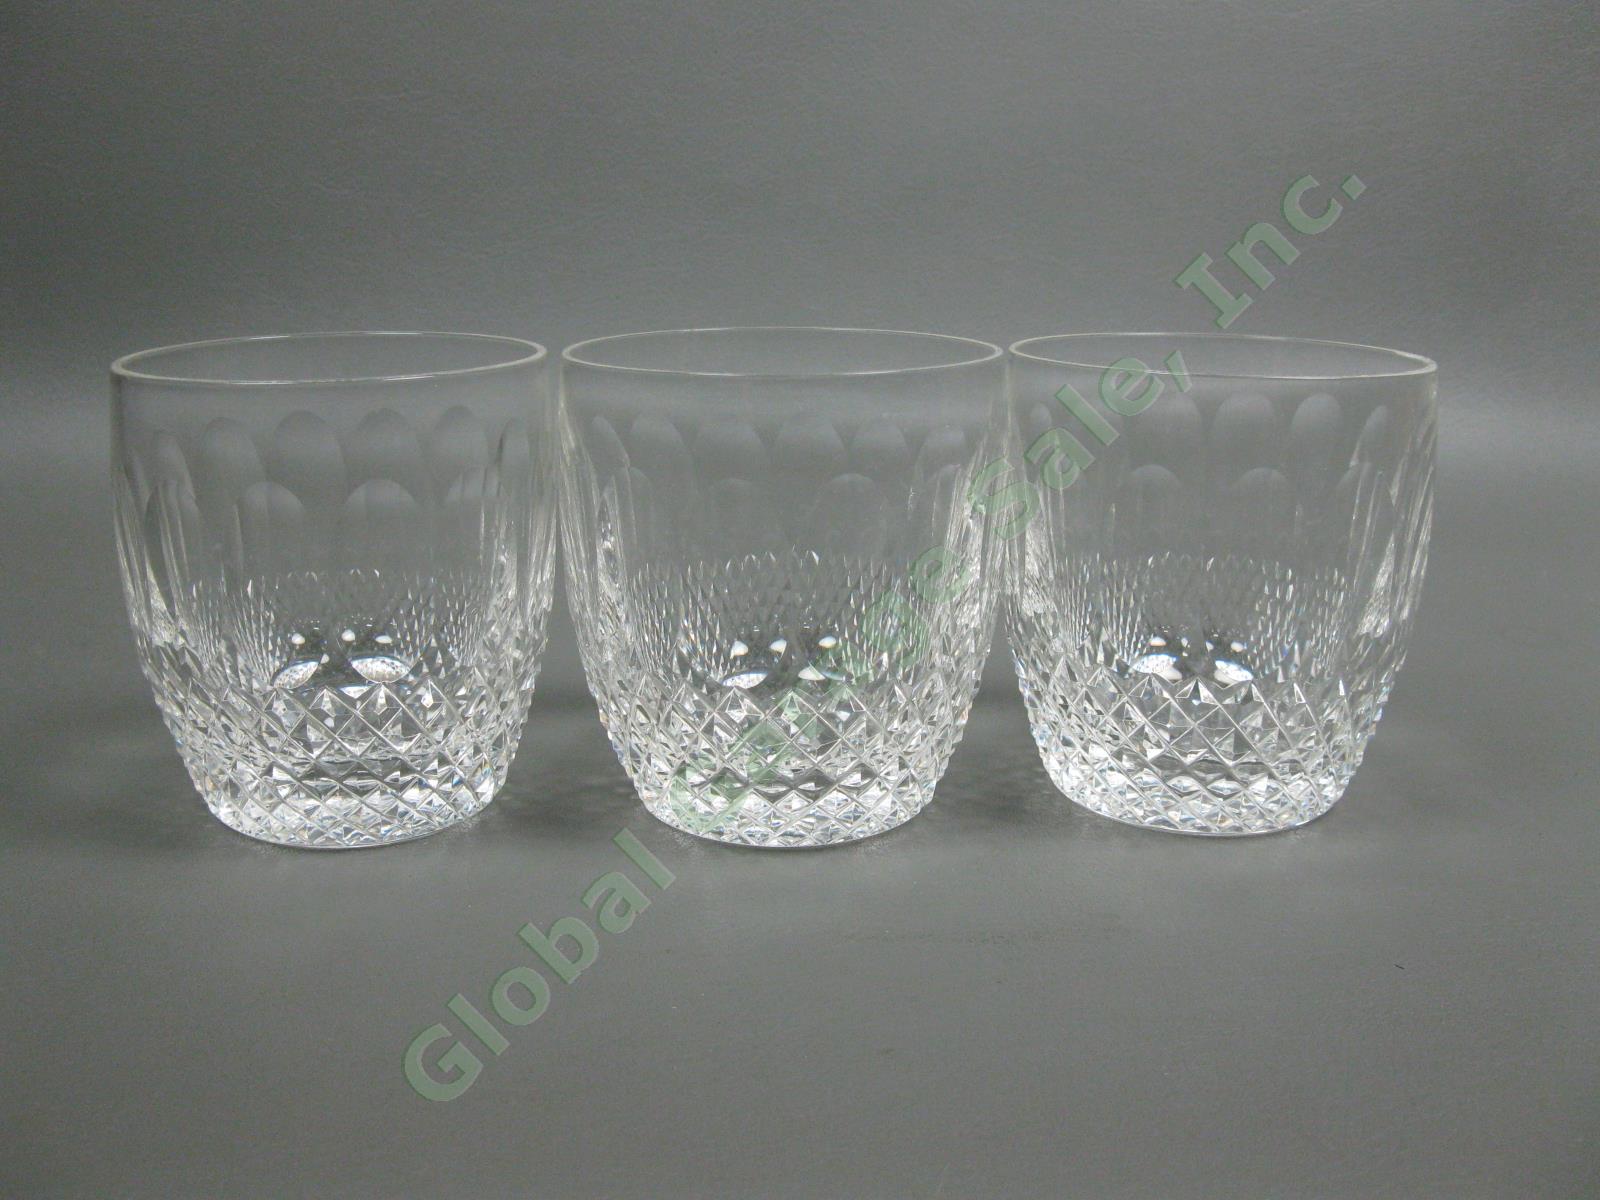 3 Waterford Crystal Colleen 9oz Water Tumbler Glasses Cut Hand-Blown Glass Set 2